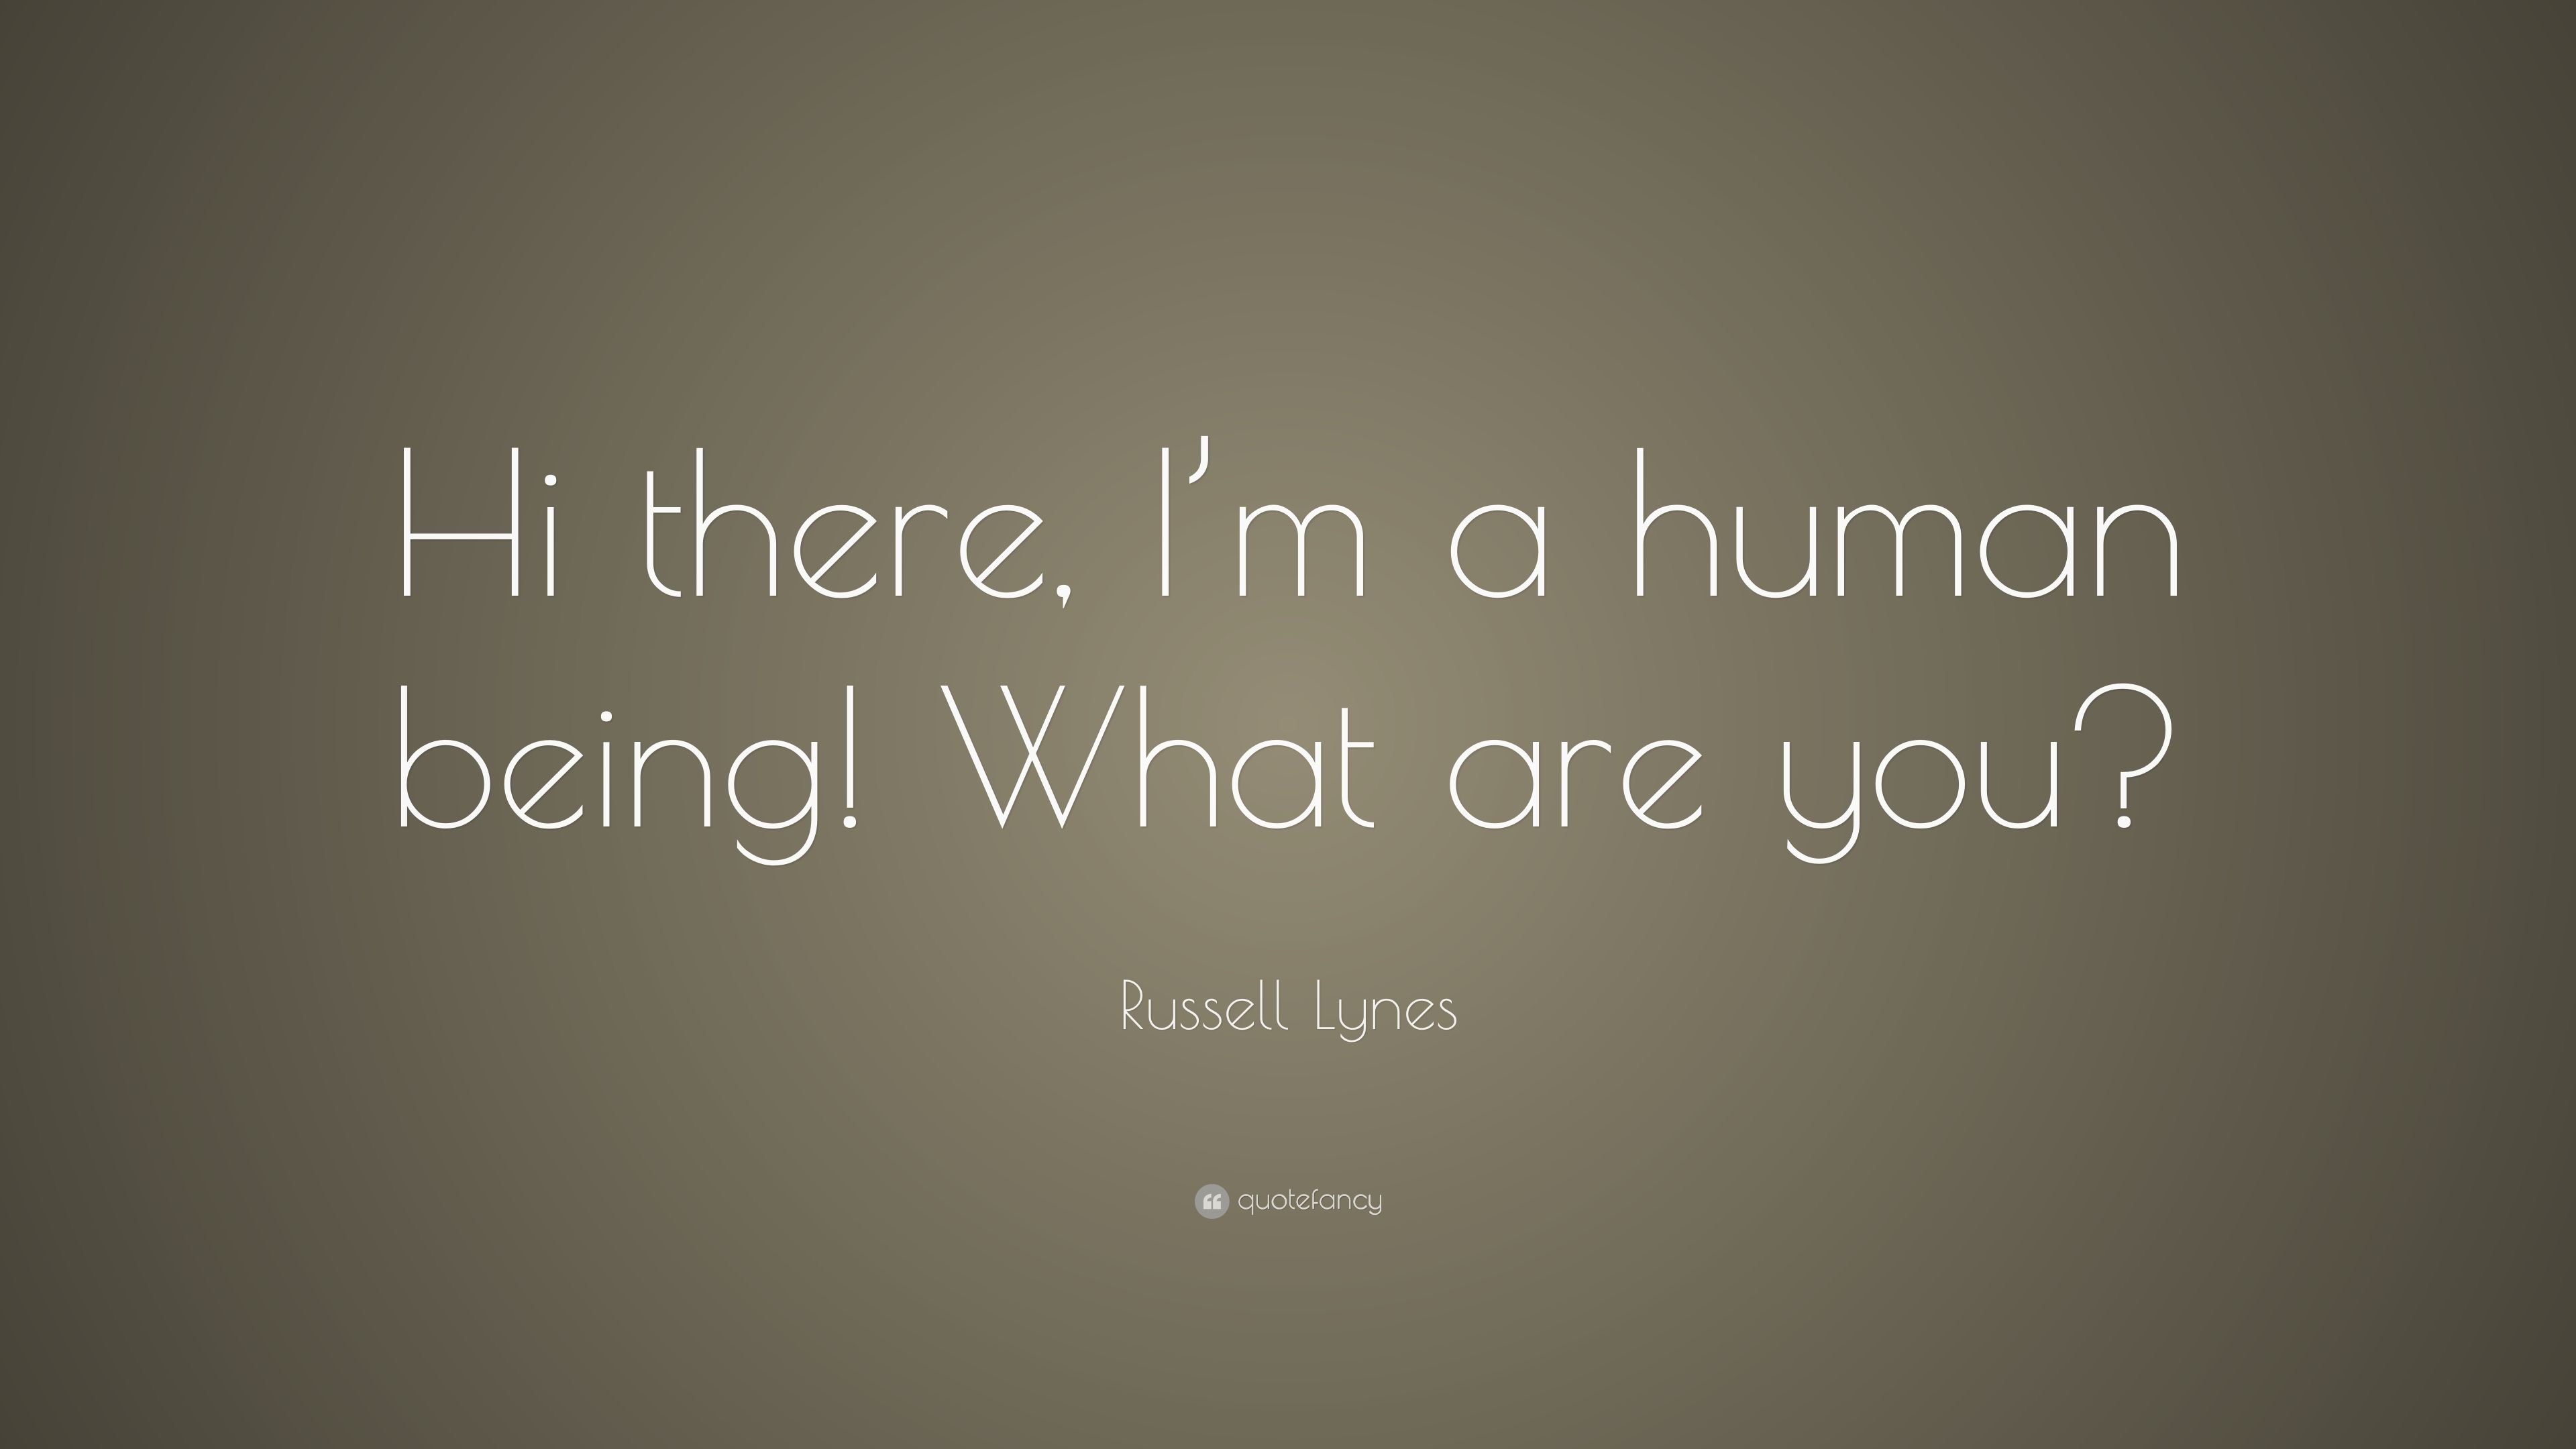 Russell Lynes Quote: “Hi there, I'm a human being! What are you?” (7 wallpaper)